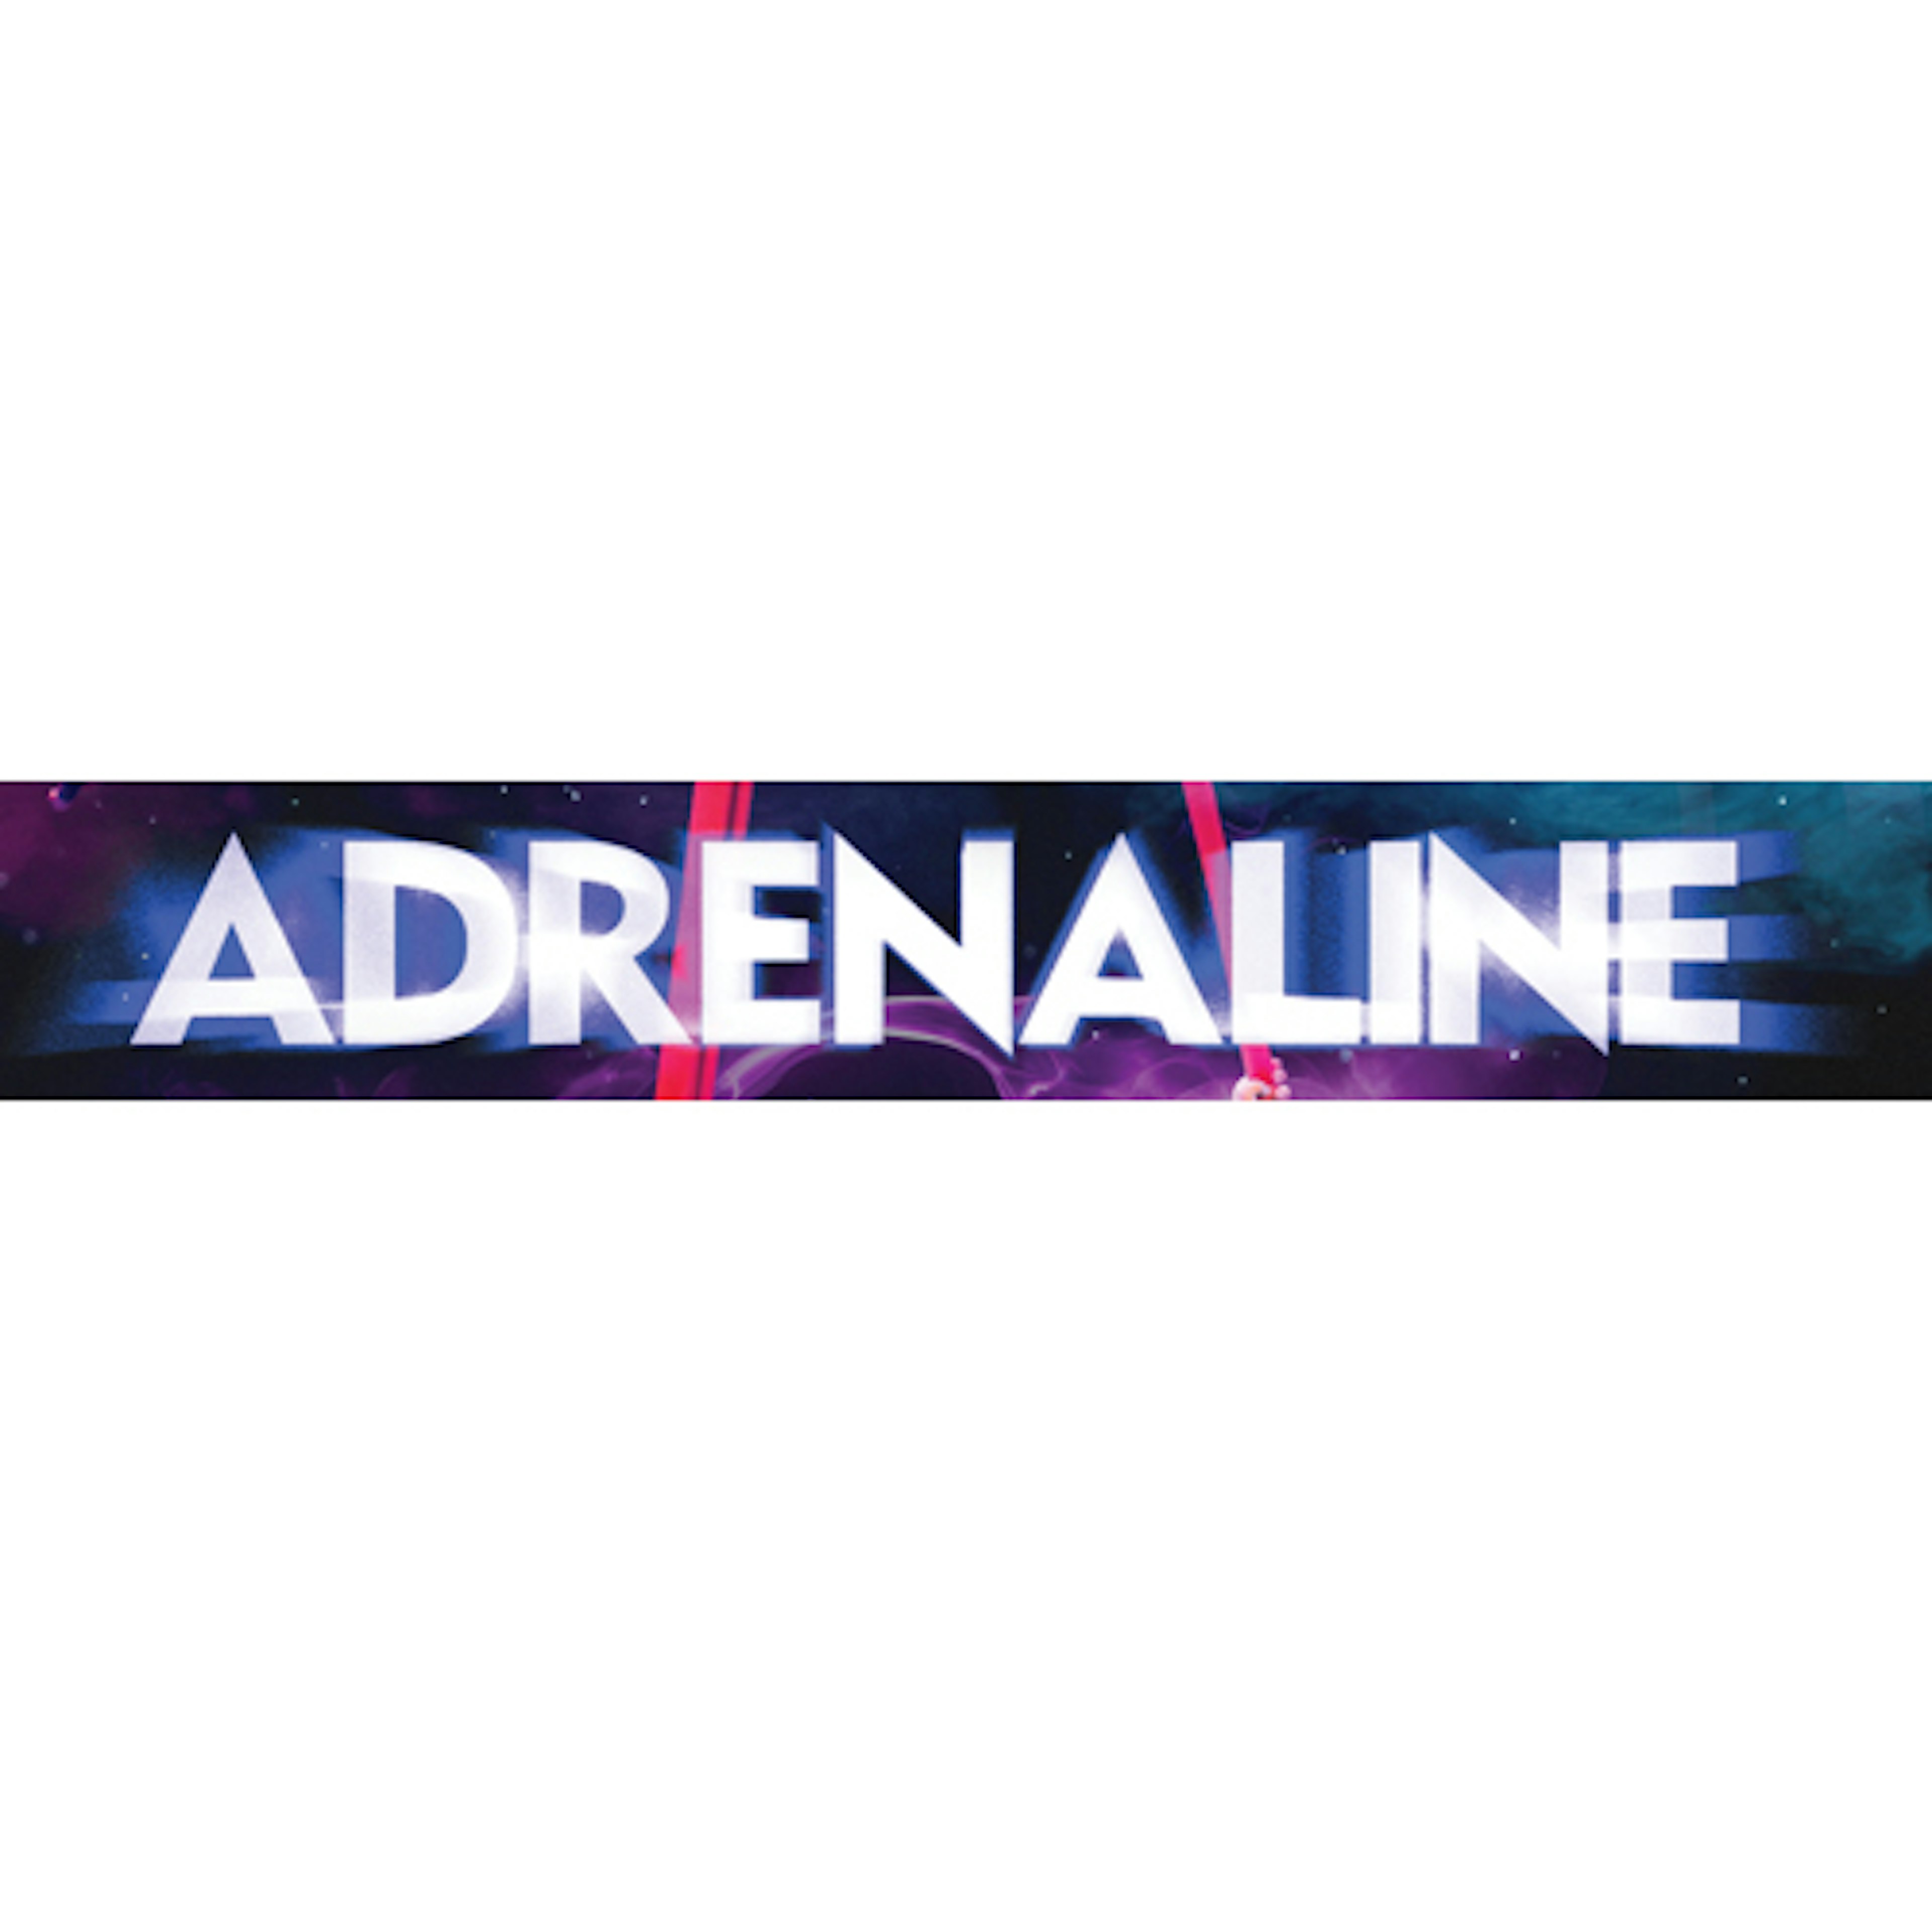 Broadway Theater and Le Grand Cirque present: Adrenaline